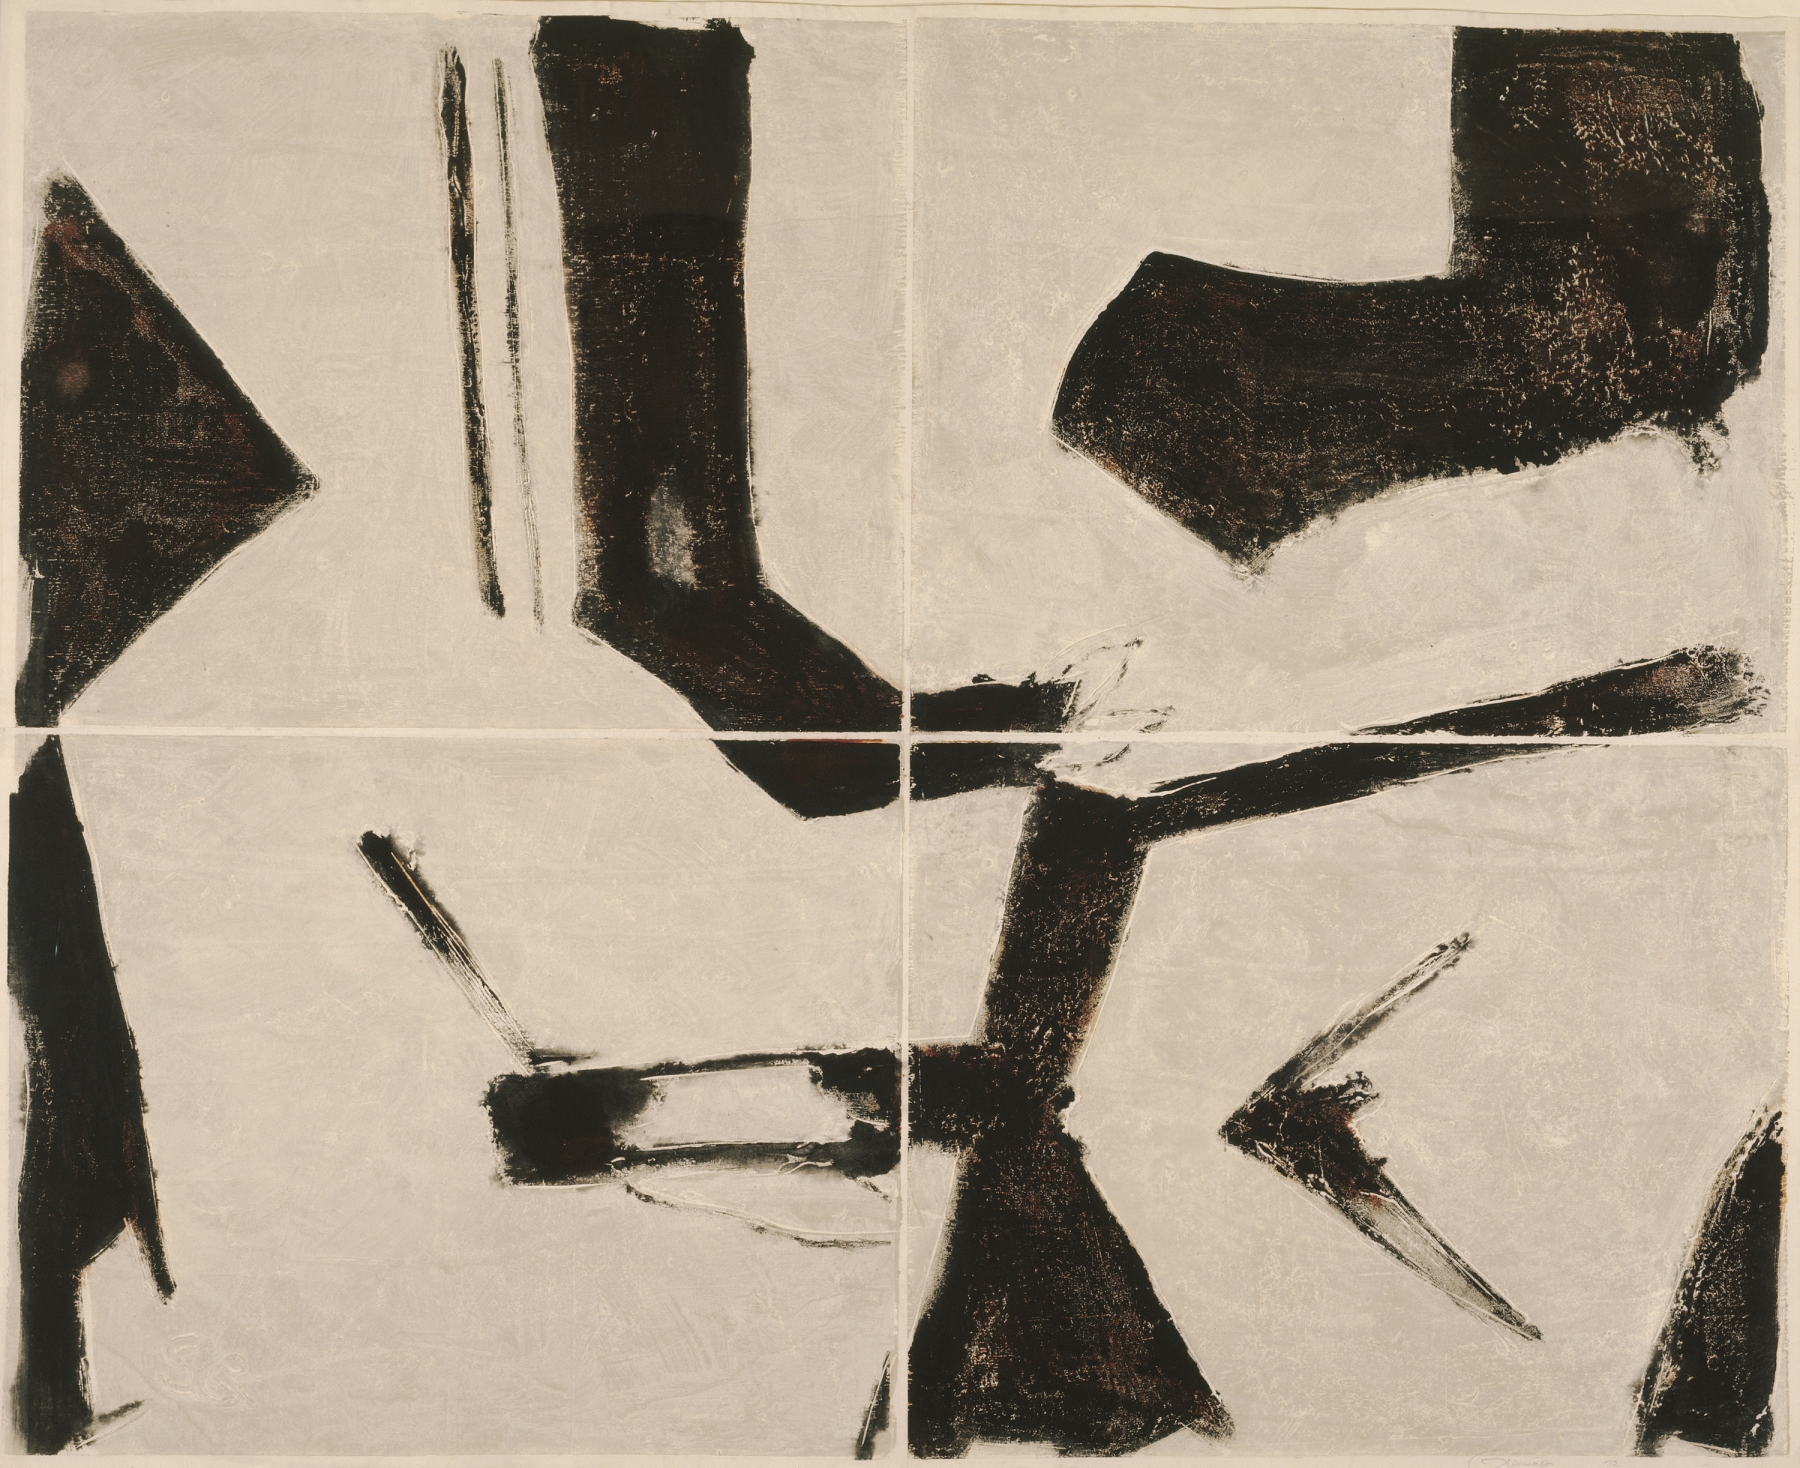 Untitled, PP 4002, 1972
Water Soluble Printer&rsquo;s Ink and Casein
​​​​​​​on Handmade Japanese Paper
H: 38 3/4 x W: 48 1/4 inches

&nbsp;